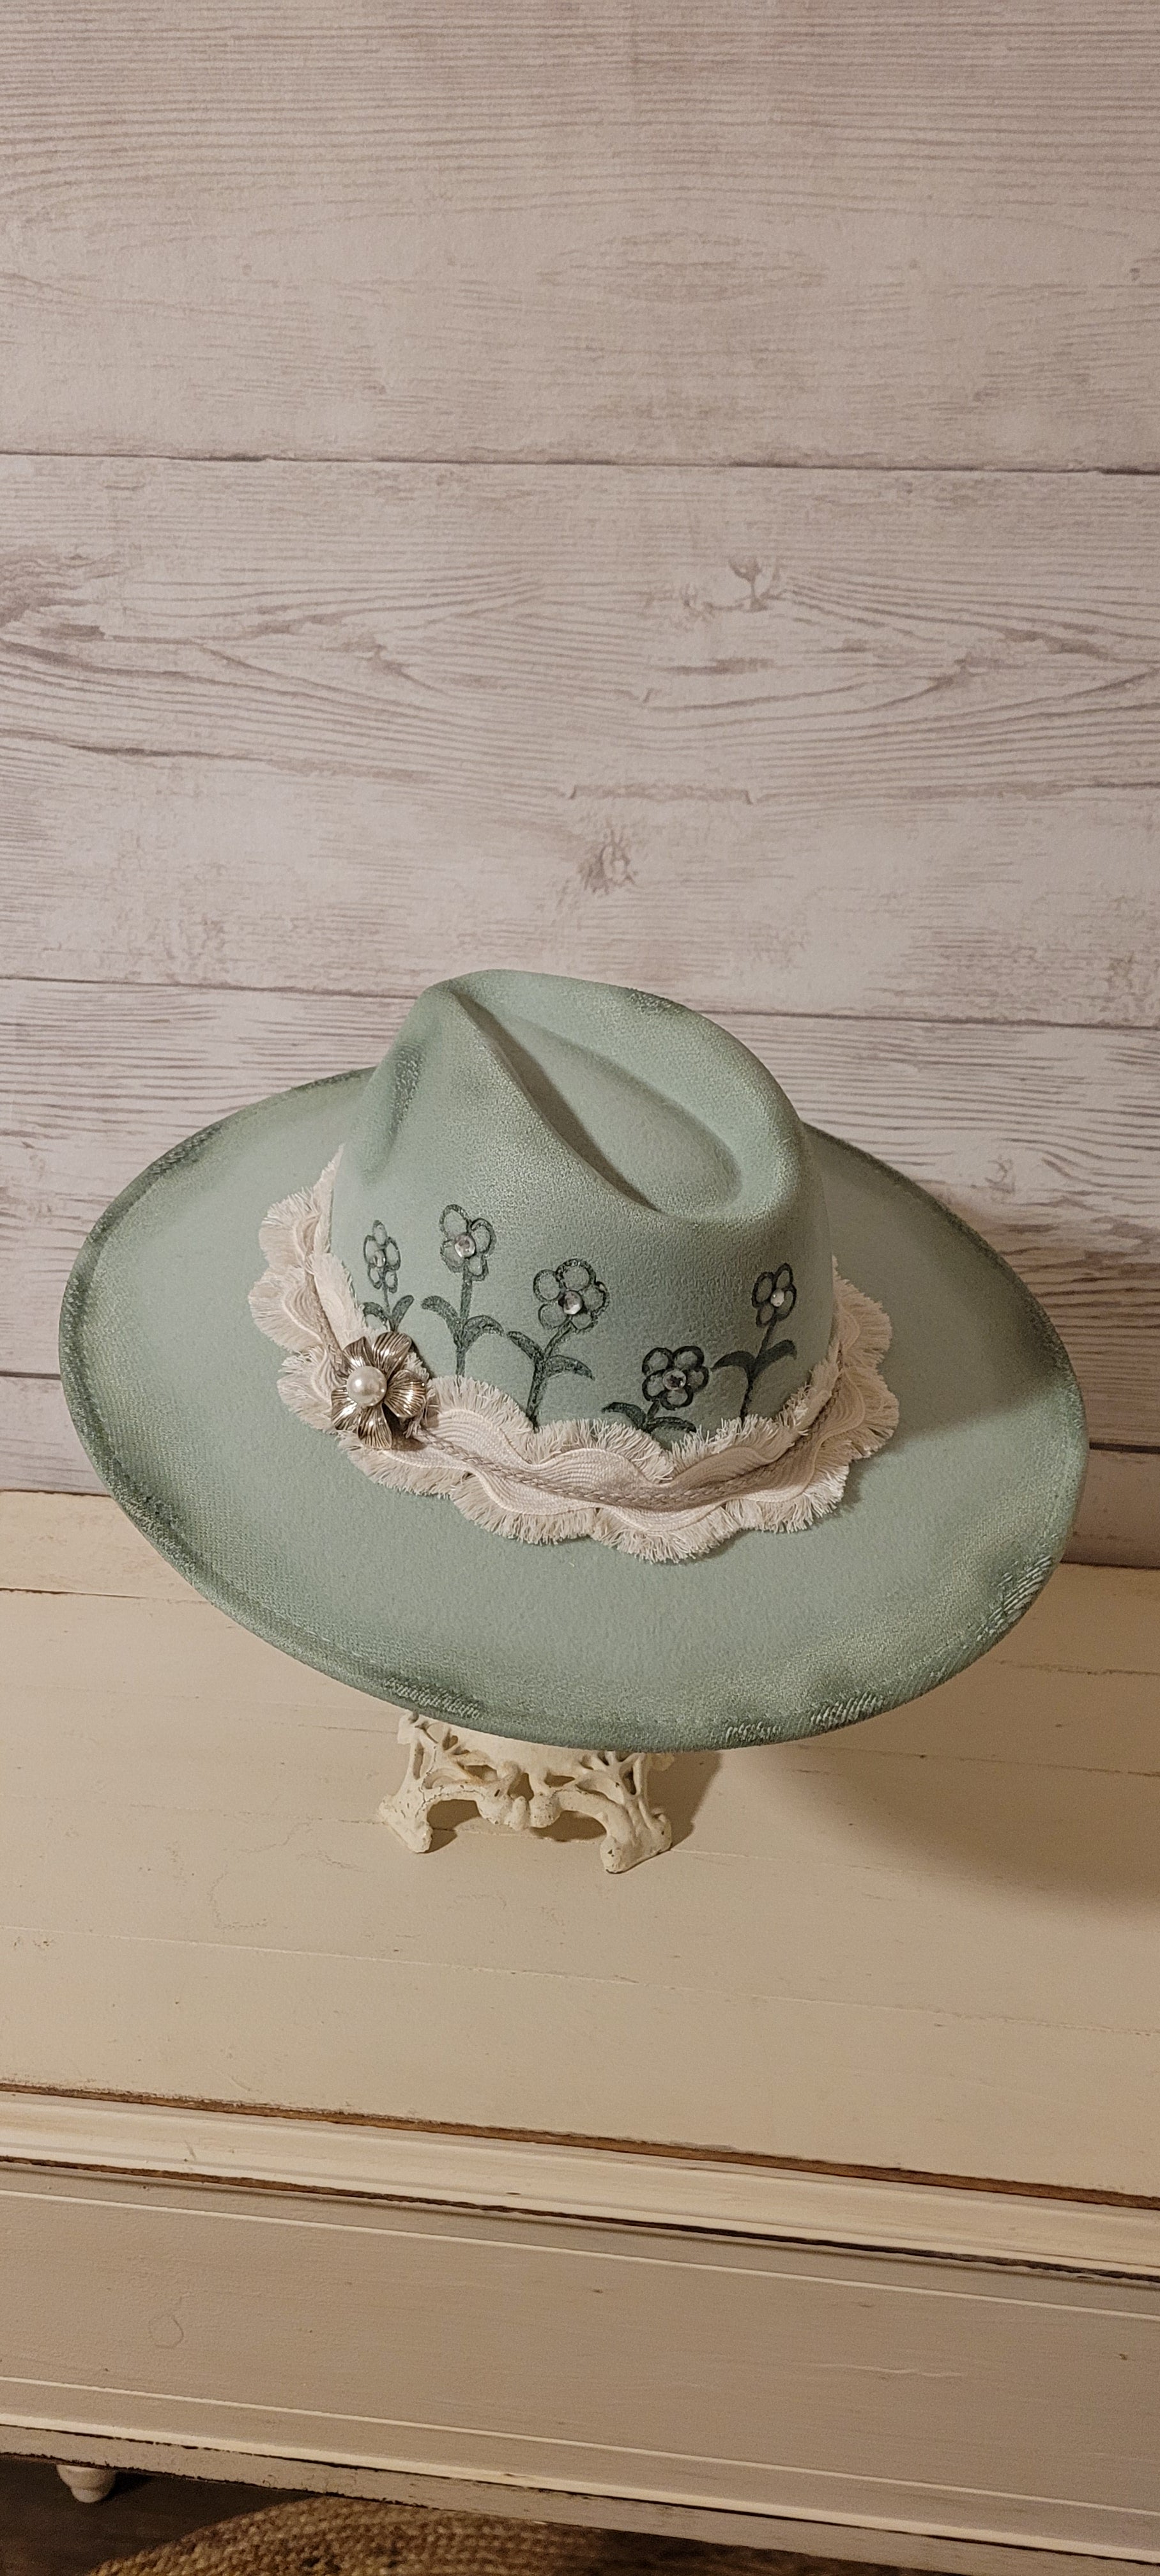 Features flowers engraved Wavy frayed ribbon, natural cord, rhinestones & metal pearl brooch Felt hat Flat brim 100% polyester Ribbon drawstring for hat size adjustment Head Circumference: 24" Crown Height: 5" Brim Length: 15.75" Brim Width: 14.5" Branded & numbered inside crown Custom burned & engraved by Kayla